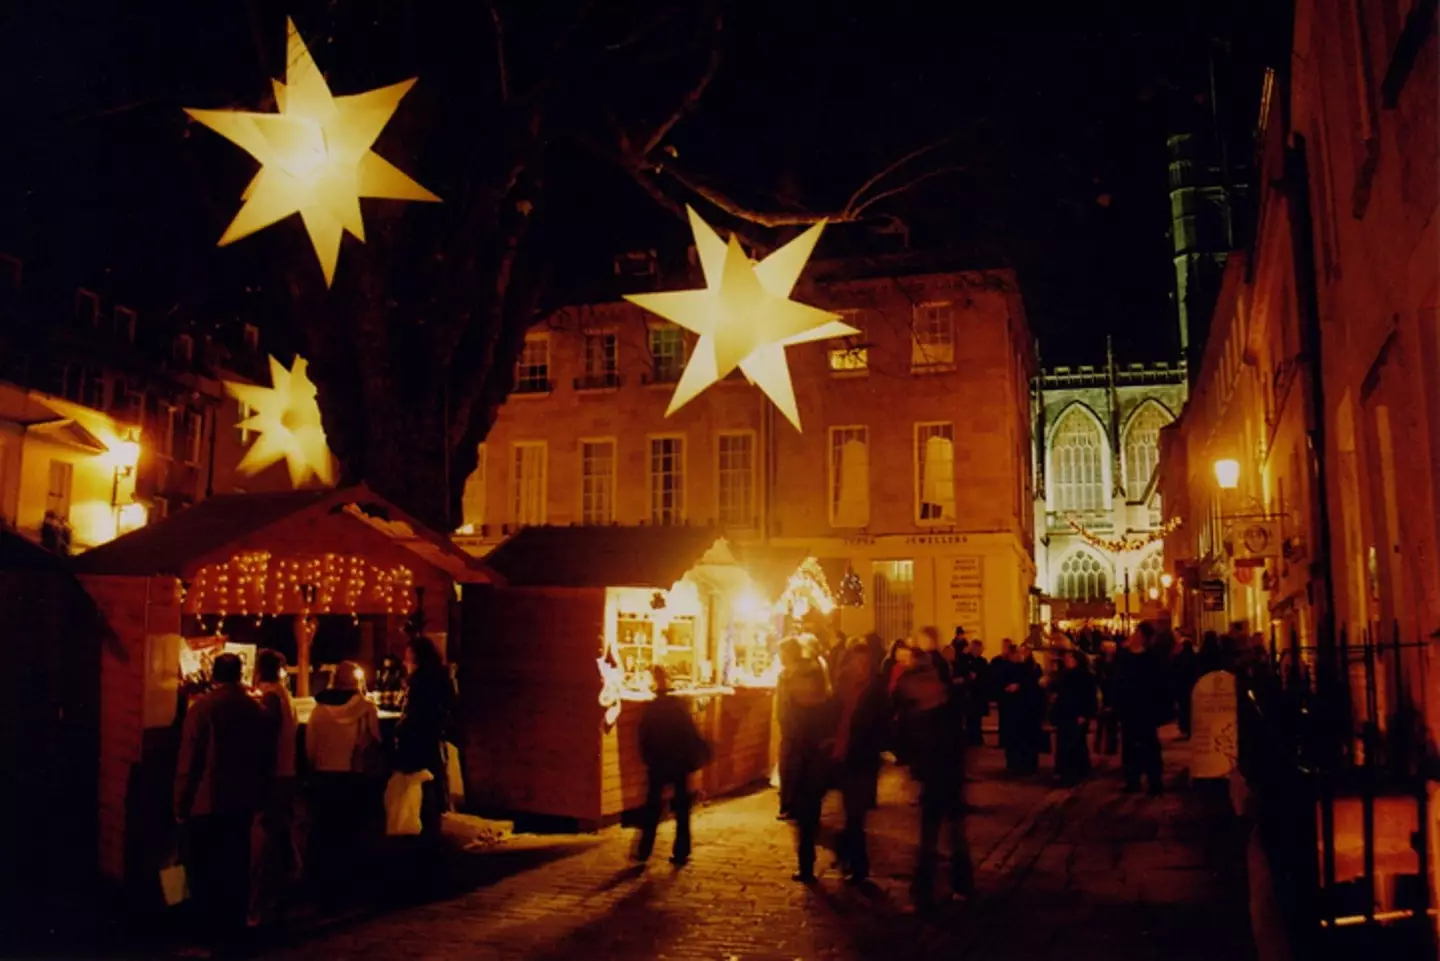 Peruse 260 stalls at the Bath's World Heritage Site Christmas Market.